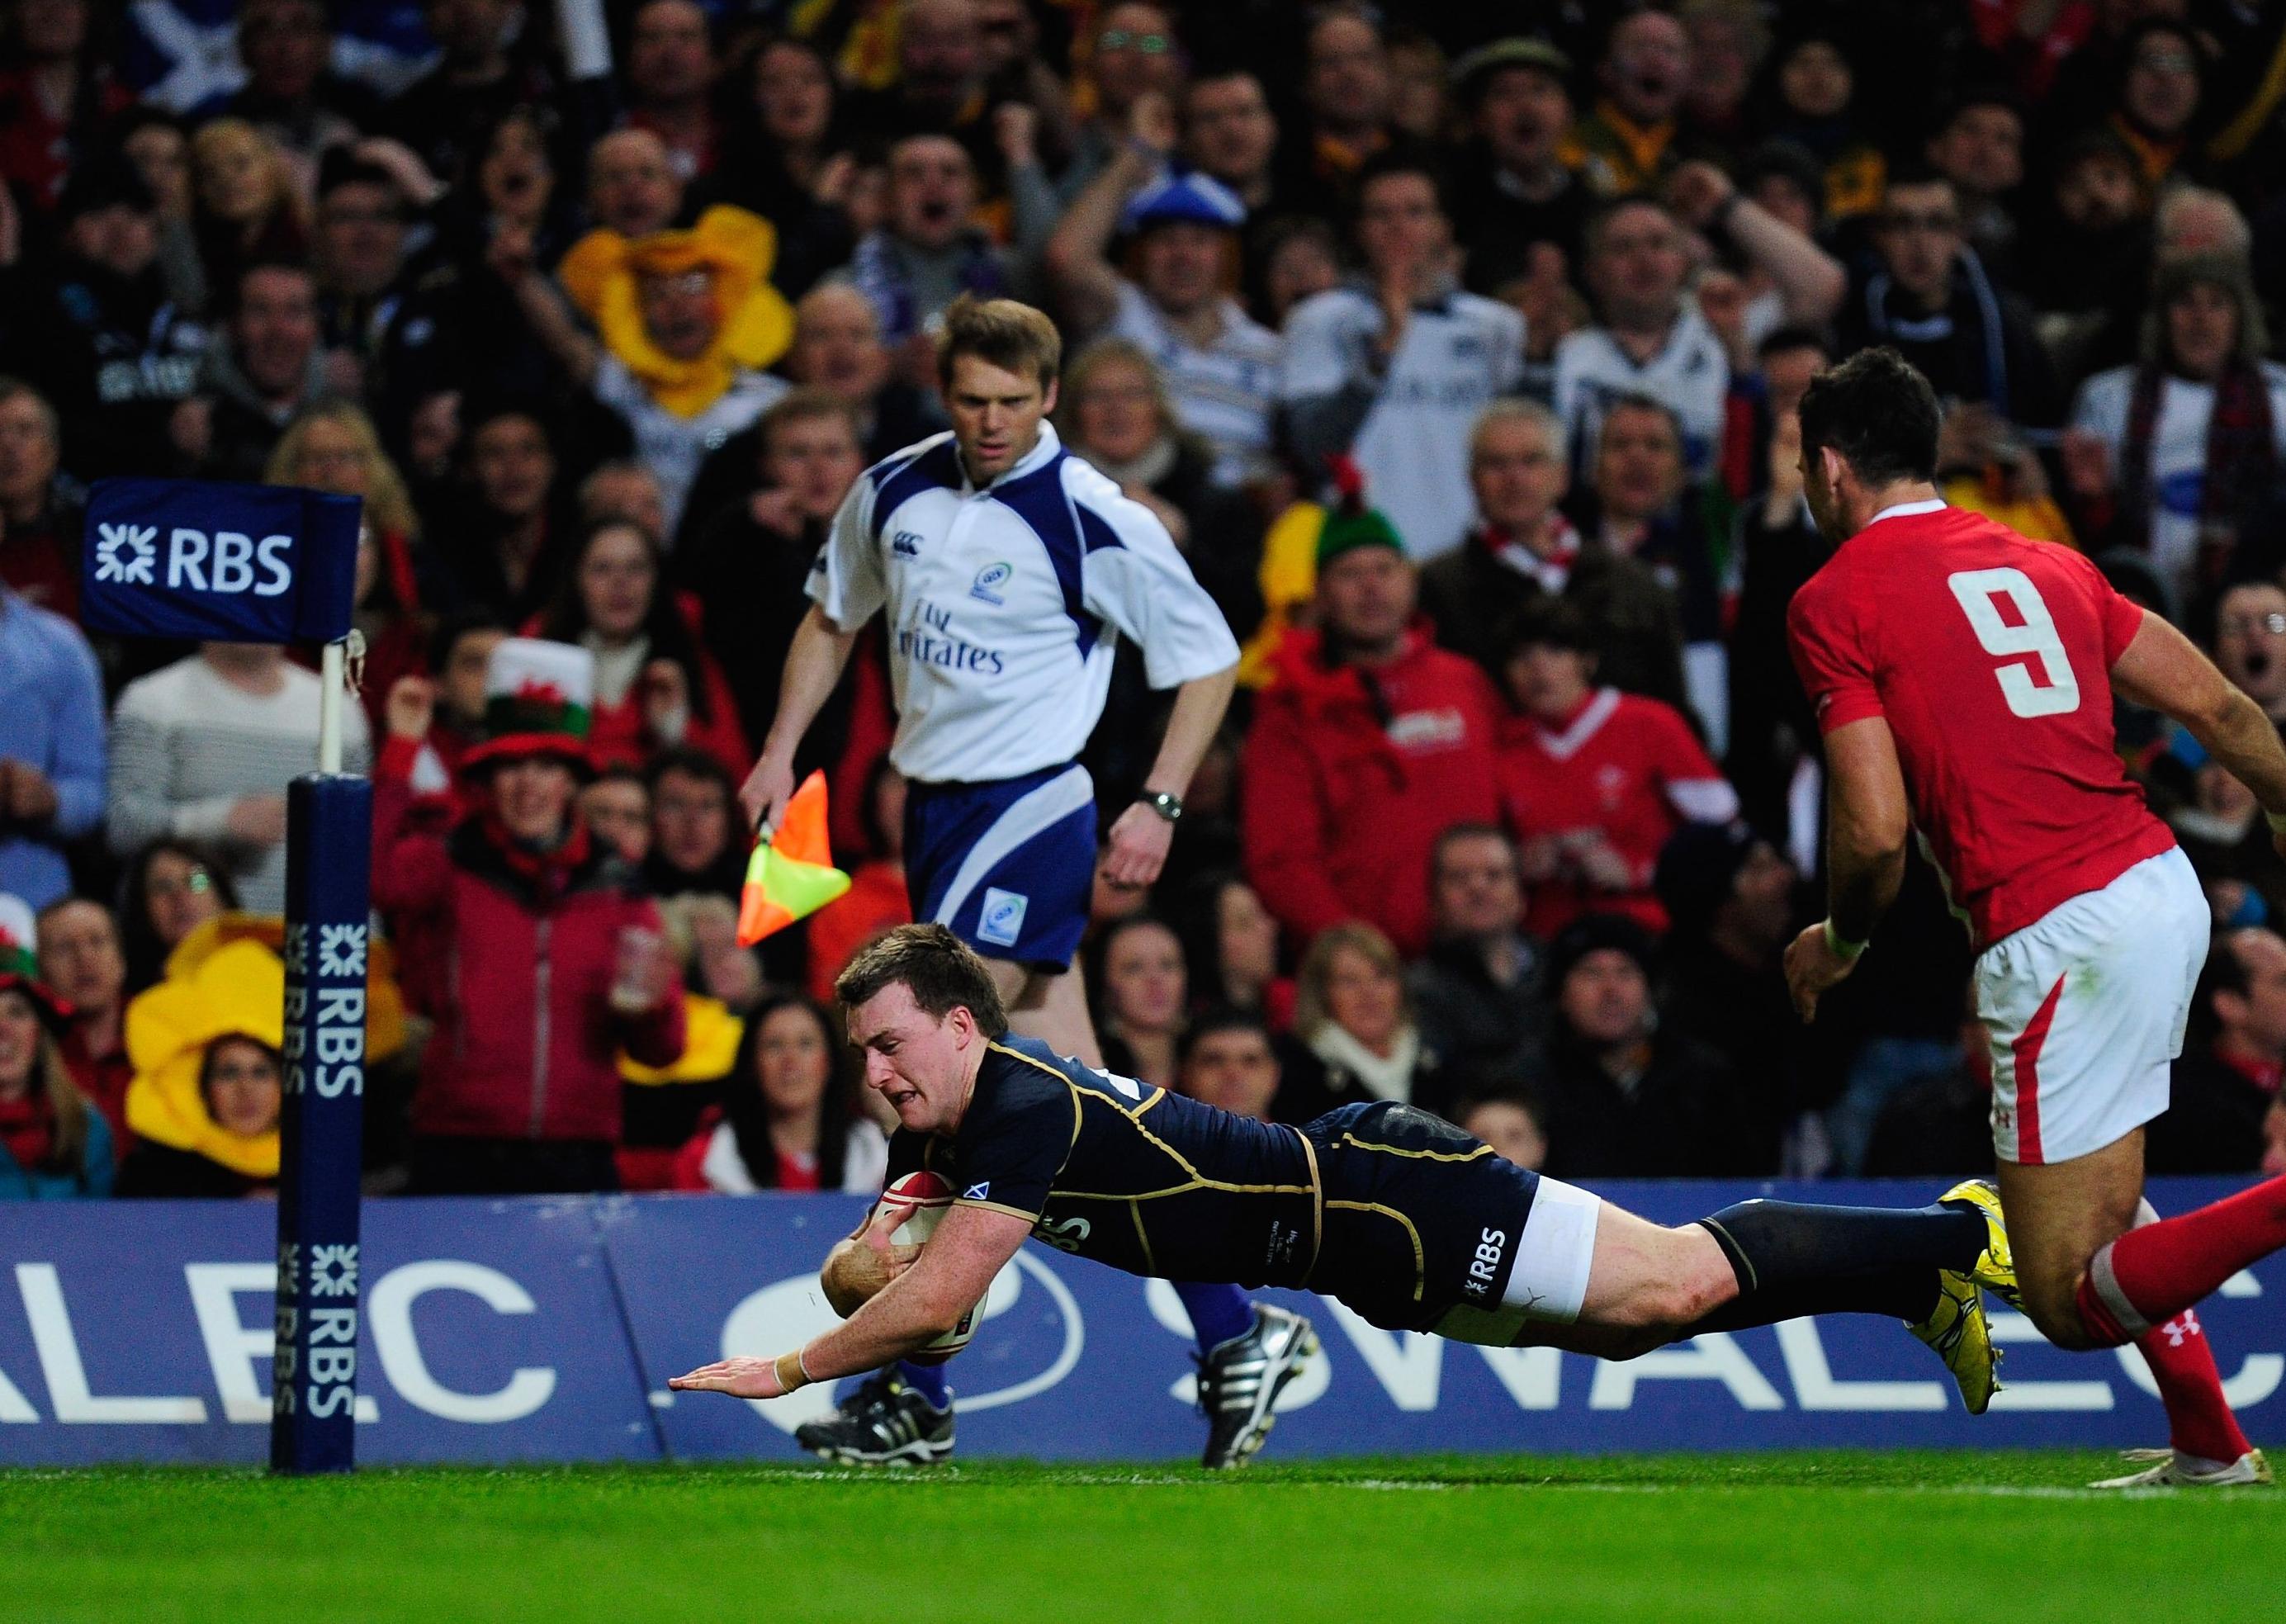 CARDIFF, WALES - FEBRUARY 12:  Scotland player Stuart Hogg dives over the line but the try is not given after after a knock during the RBS Six Nations game between Wales and Scotland at the  Millennium Stadium on February 12, 2012 in Cardiff, Wales.  (Photo by Stu Forster/Getty Images)